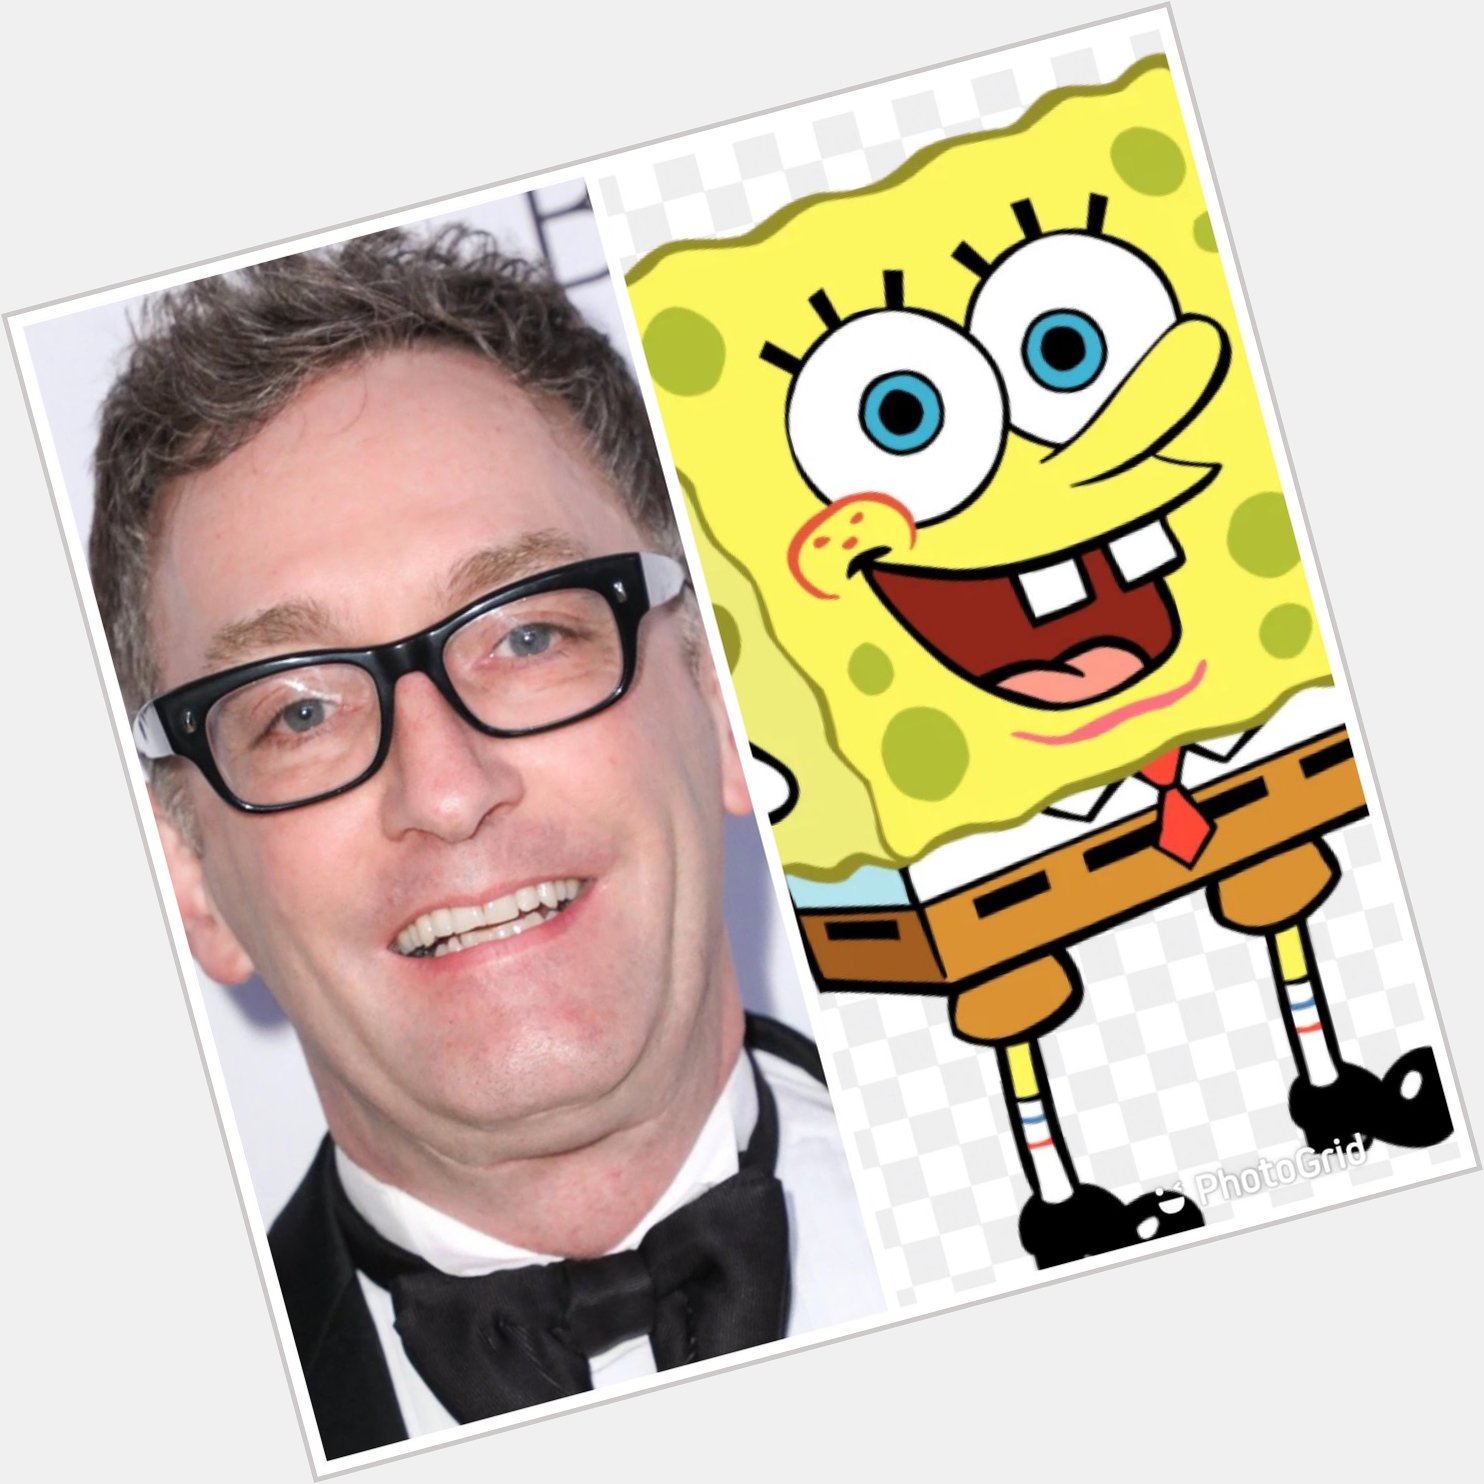 Happy Birthday To One of My Favorite Voice Over Actors and The Voice of SpongeBob Tom Kenny! 